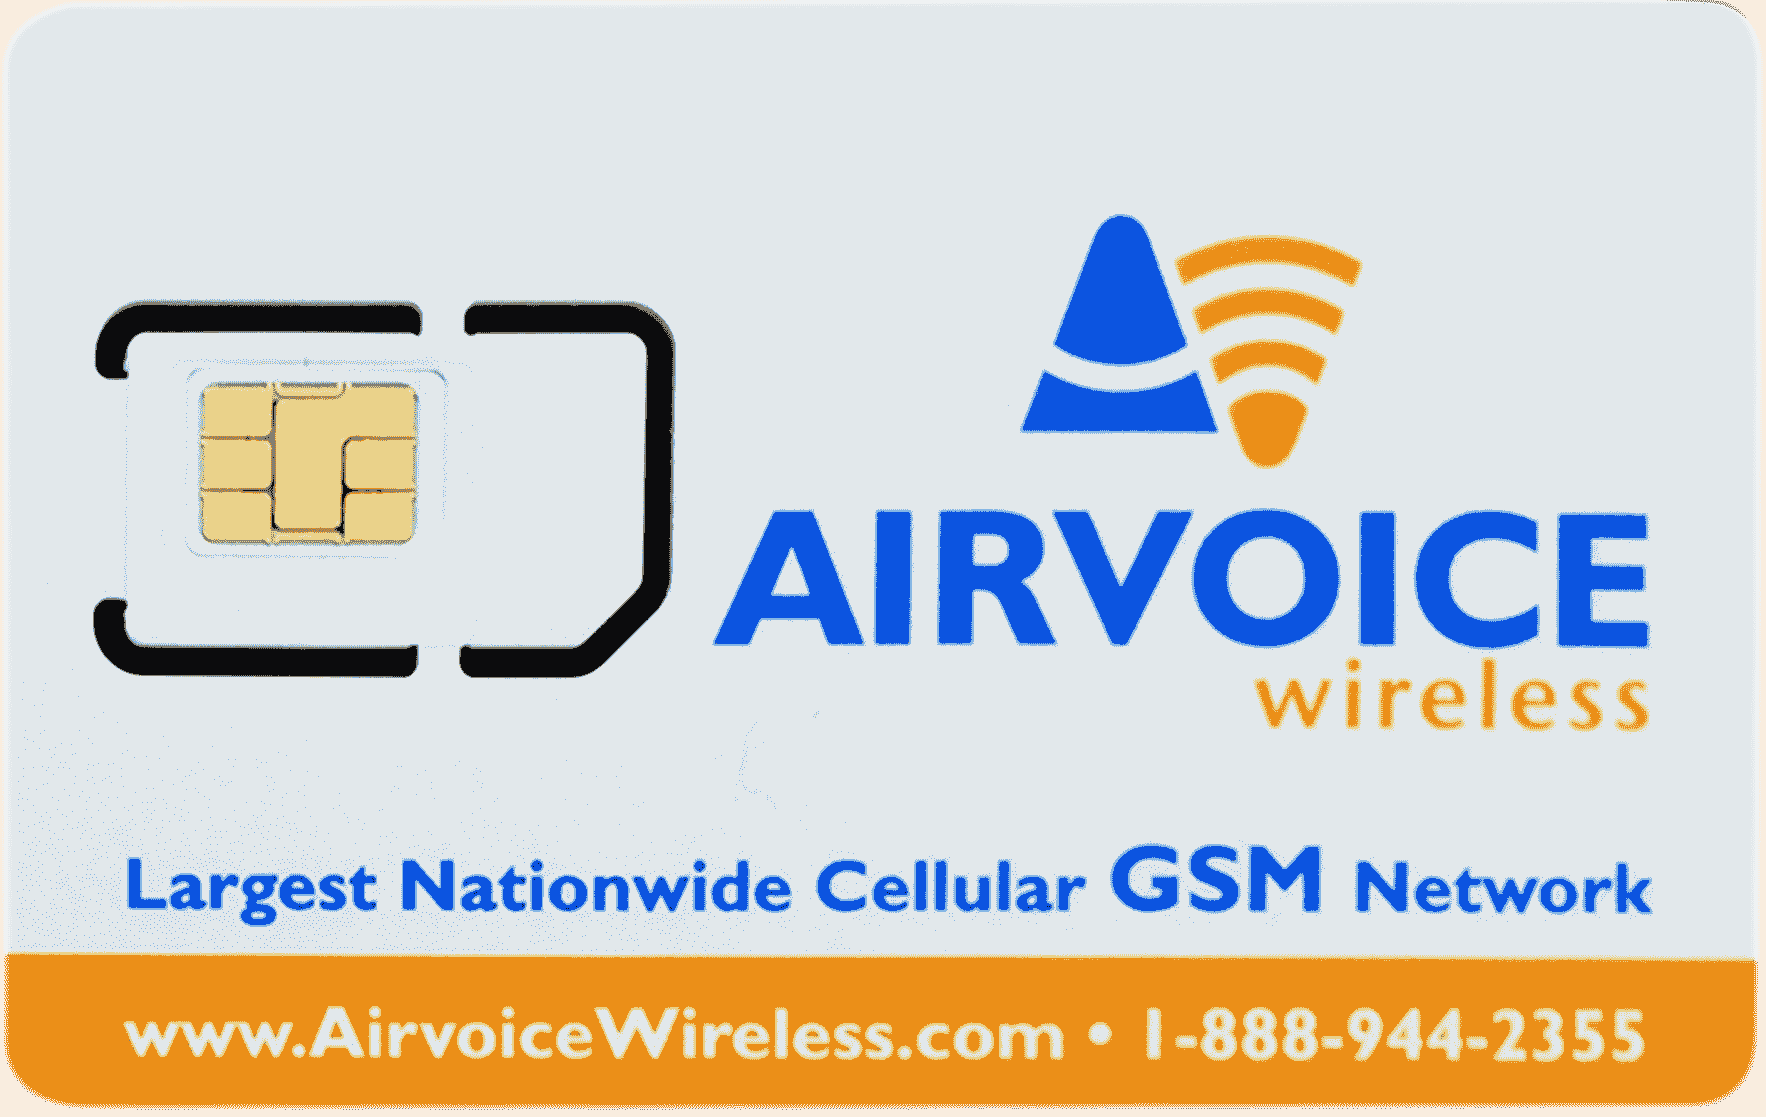 USA AT&T AirVoice SIM card - pay monthly 250 minutes